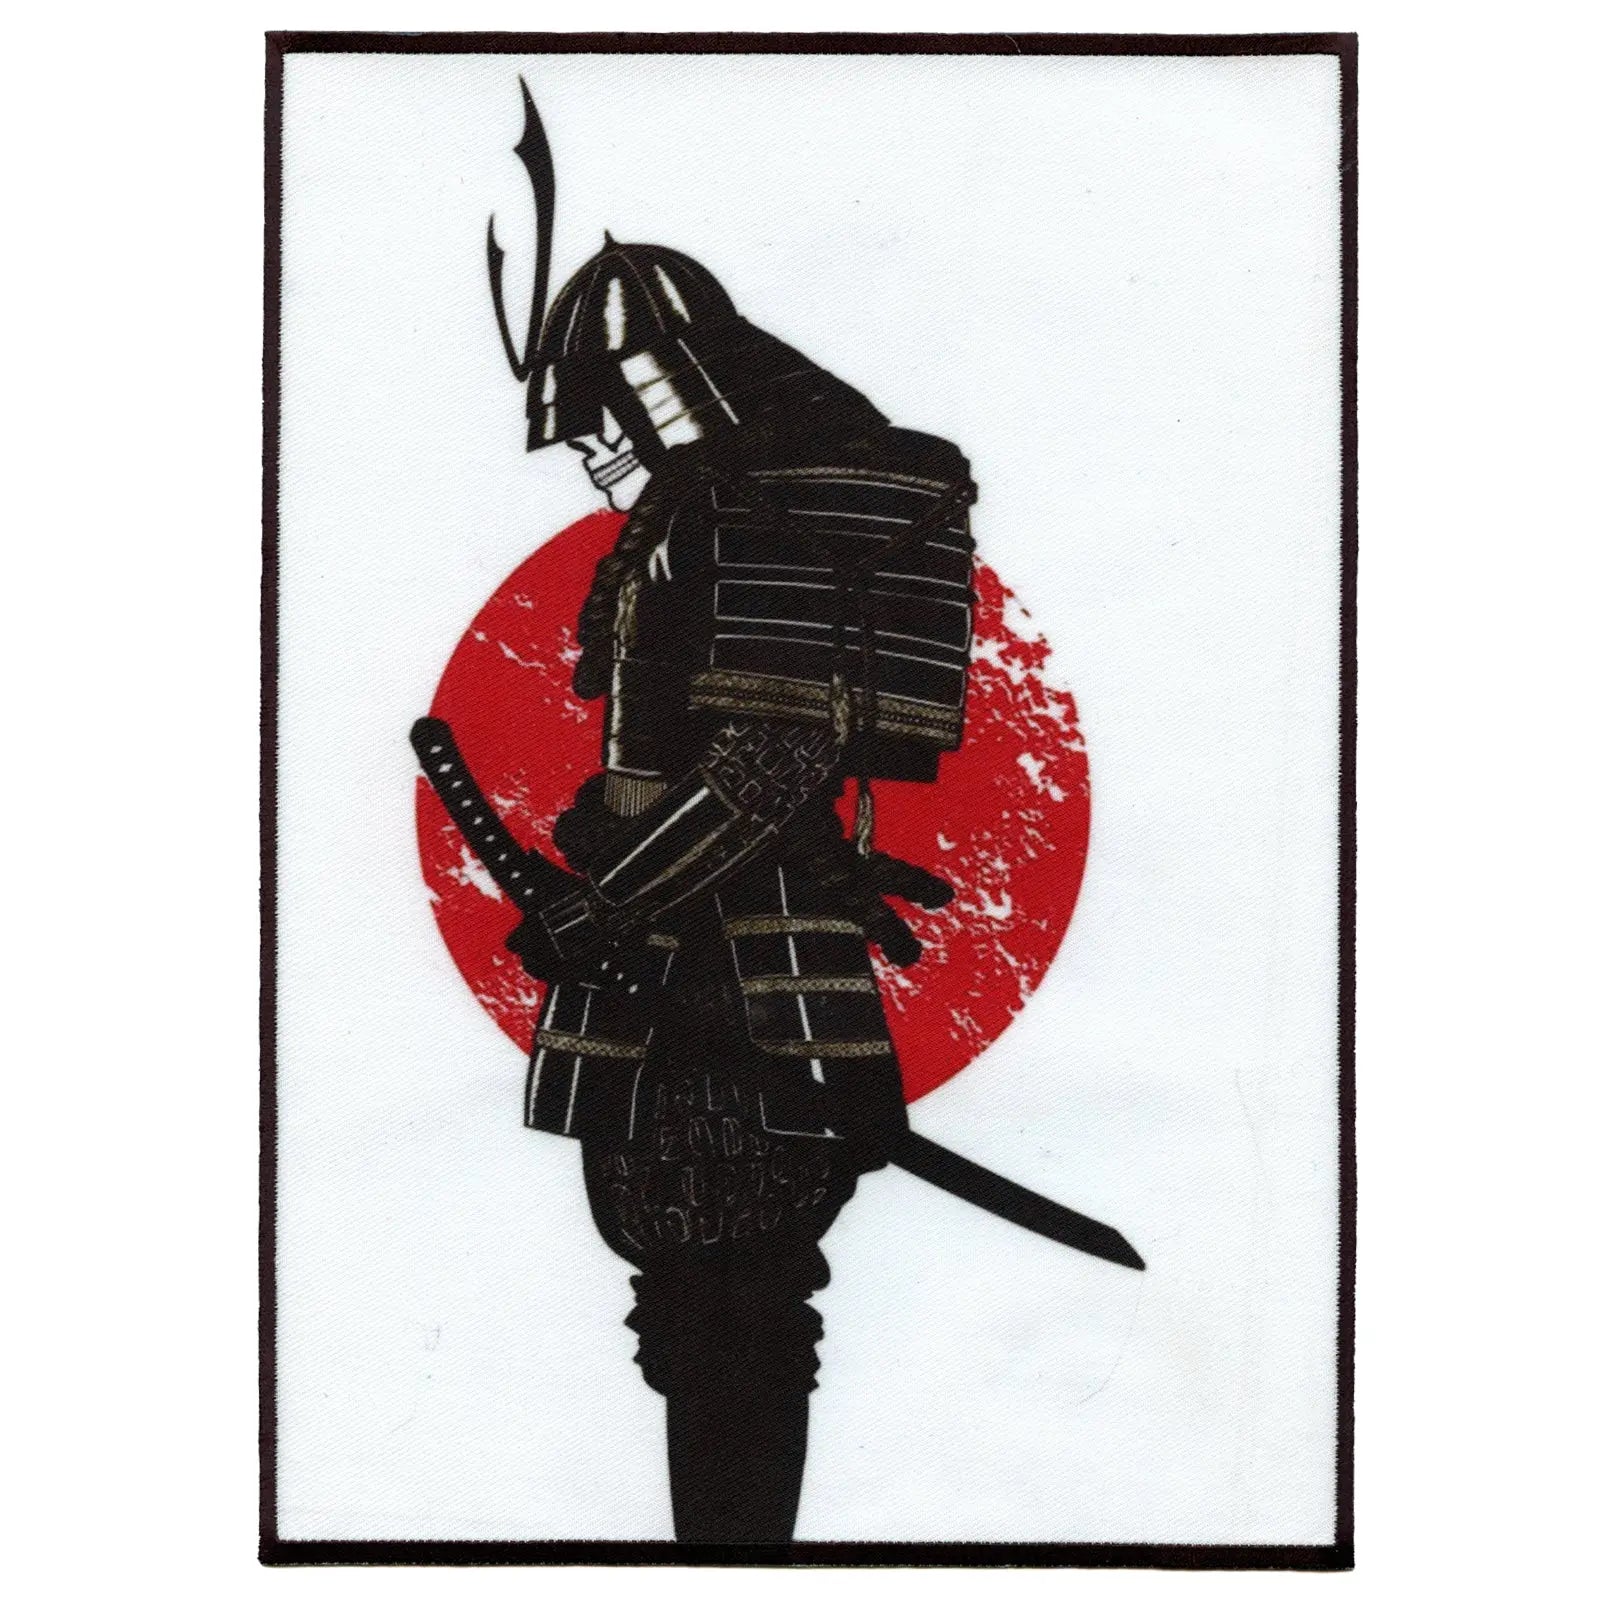 Japanese Skeleton Bushi Warrior FotoPatch Blood Moon XL Embroidered Iron on 